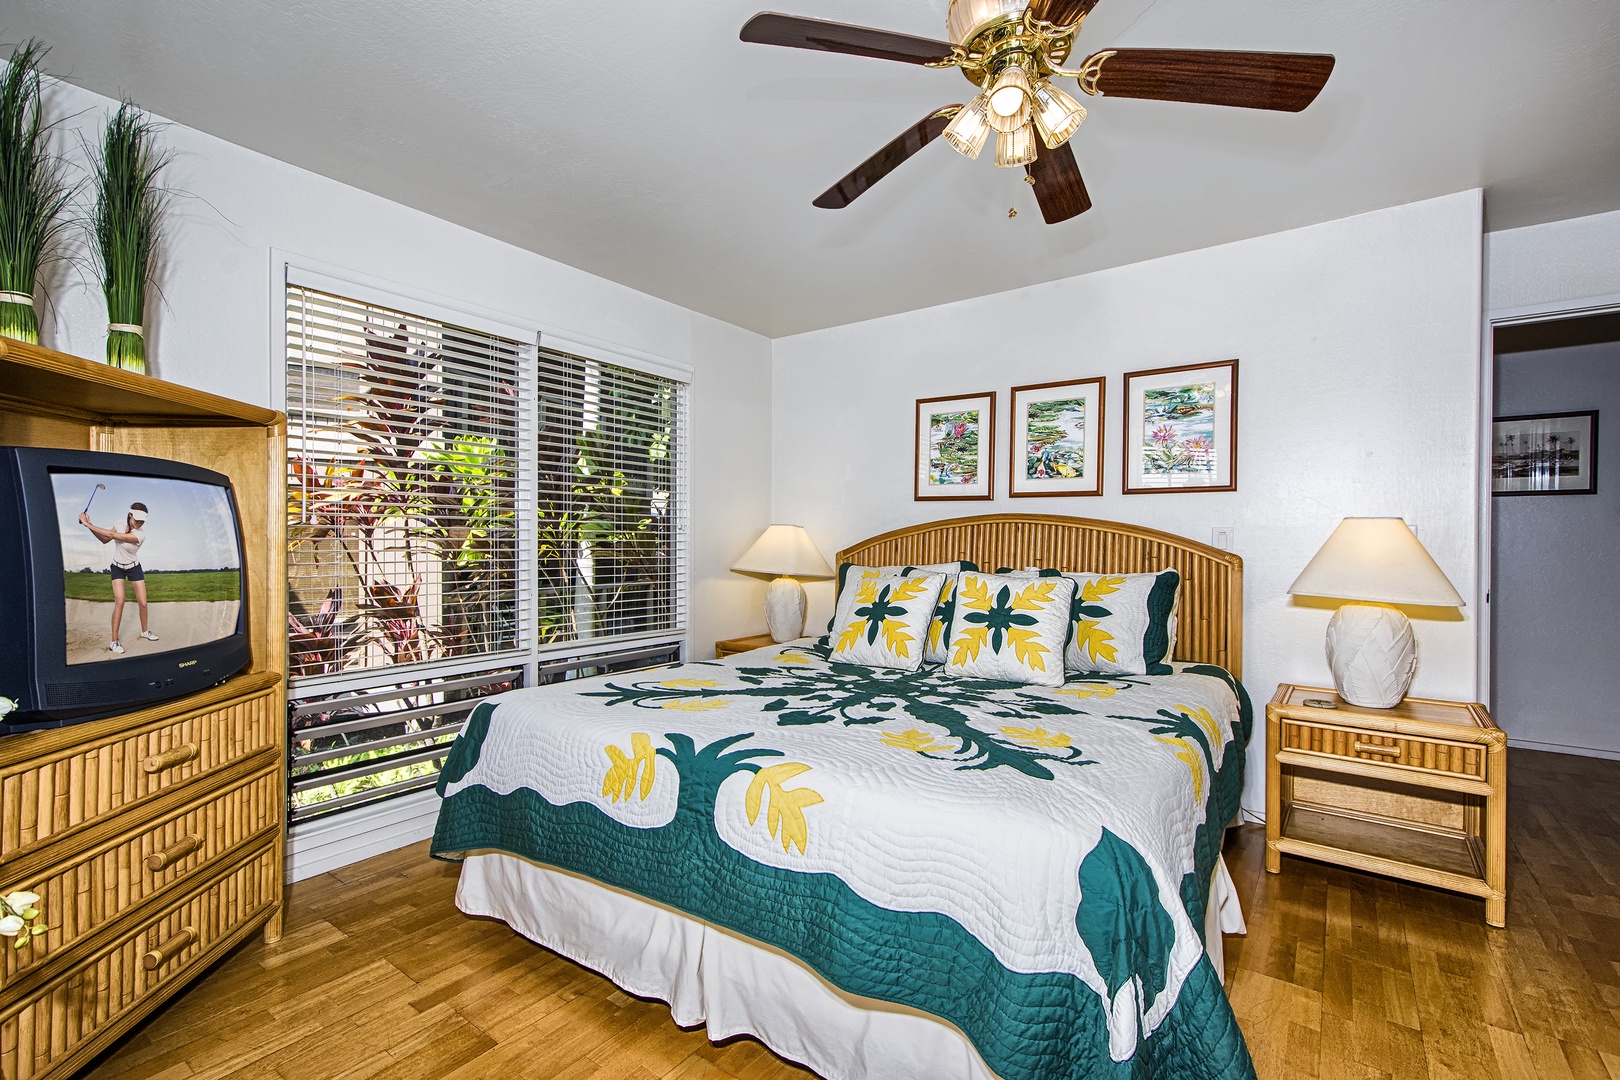 Kailua Kona Vacation Rentals, Kanaloa 701 - Primary bedroom equipped with a King bed and central A/C!